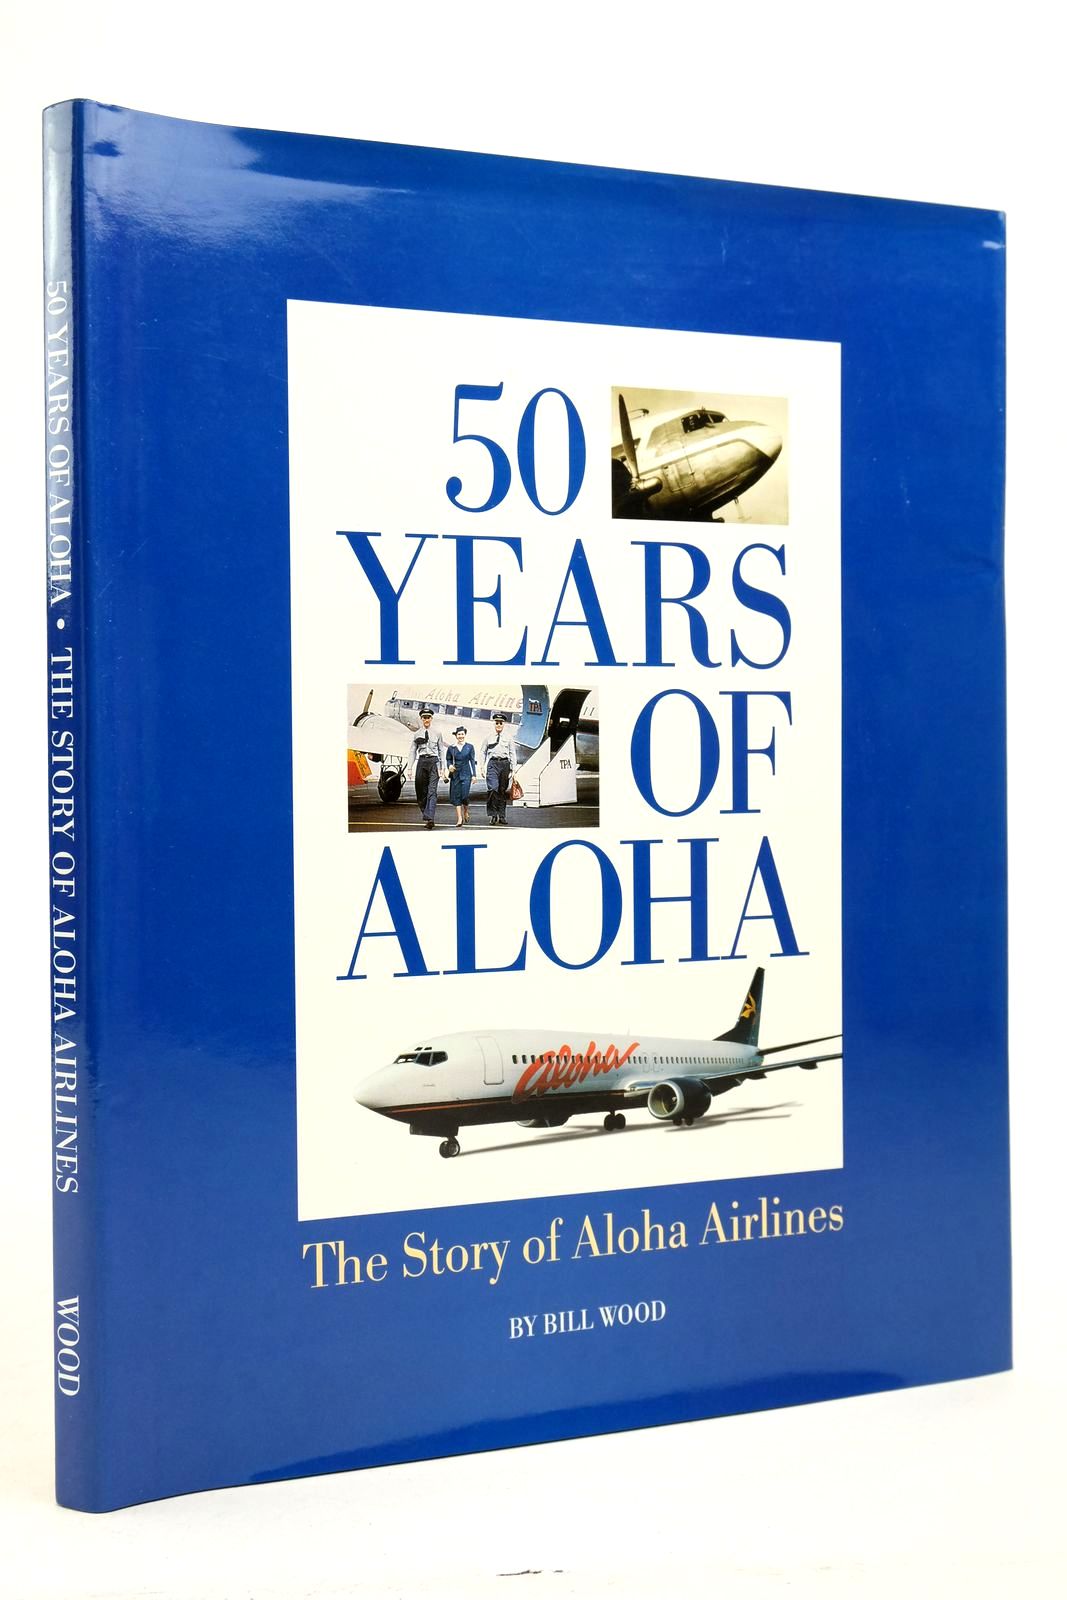 Photo of 50 YEARS OF ALOHA: THE STORY OF ALOHA AIRLINES written by Wood, Bill published by Aloha Airlines, Incorporated (STOCK CODE: 2139703)  for sale by Stella & Rose's Books